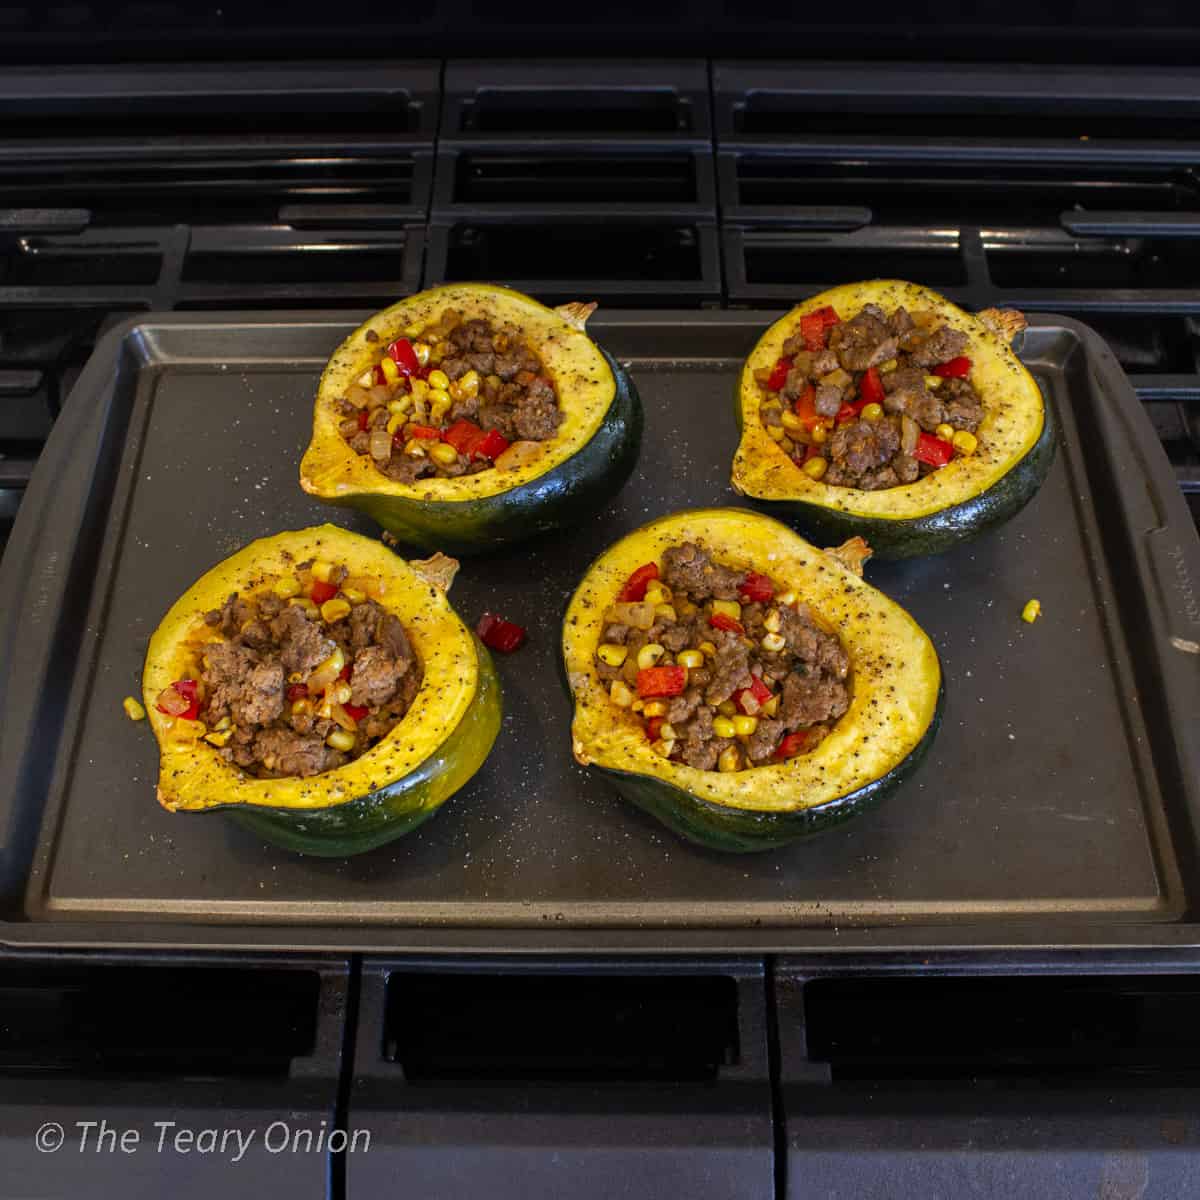 Roasted acorn squash halves stuffed with ground beef and veggies.